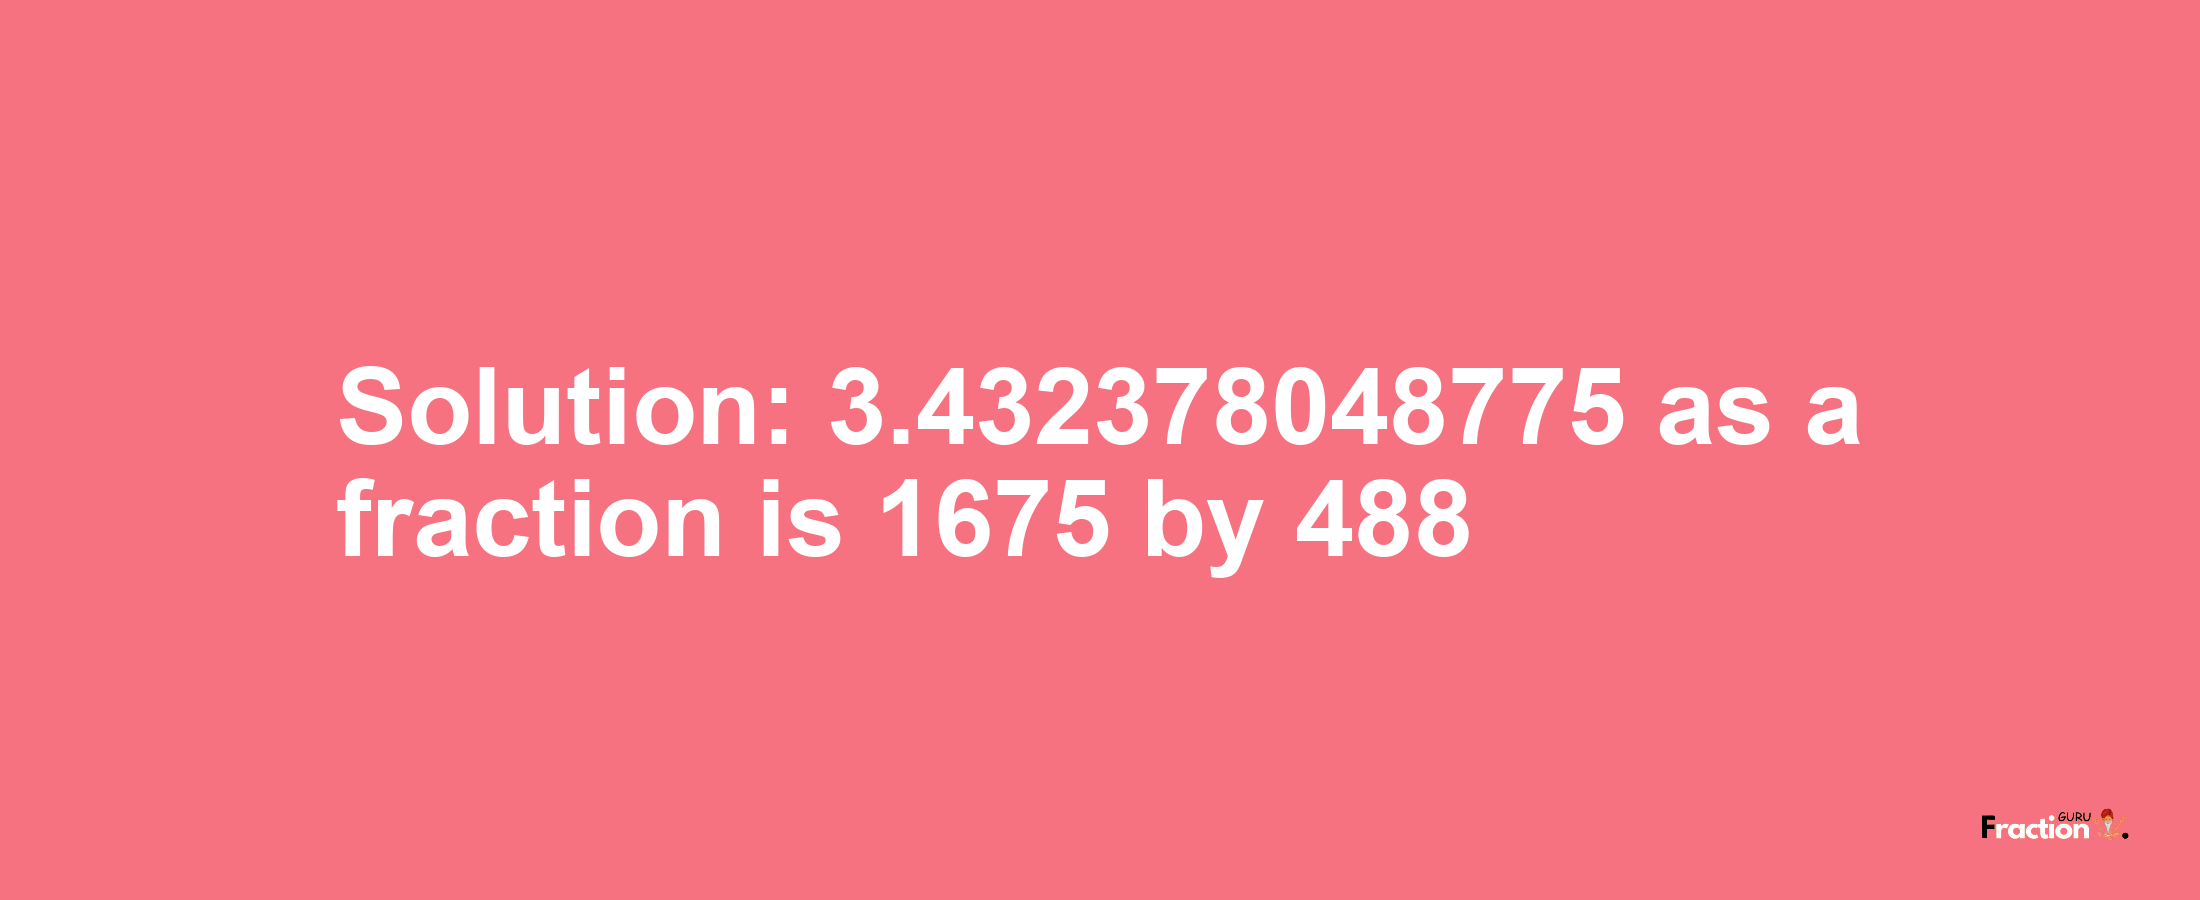 Solution:3.432378048775 as a fraction is 1675/488